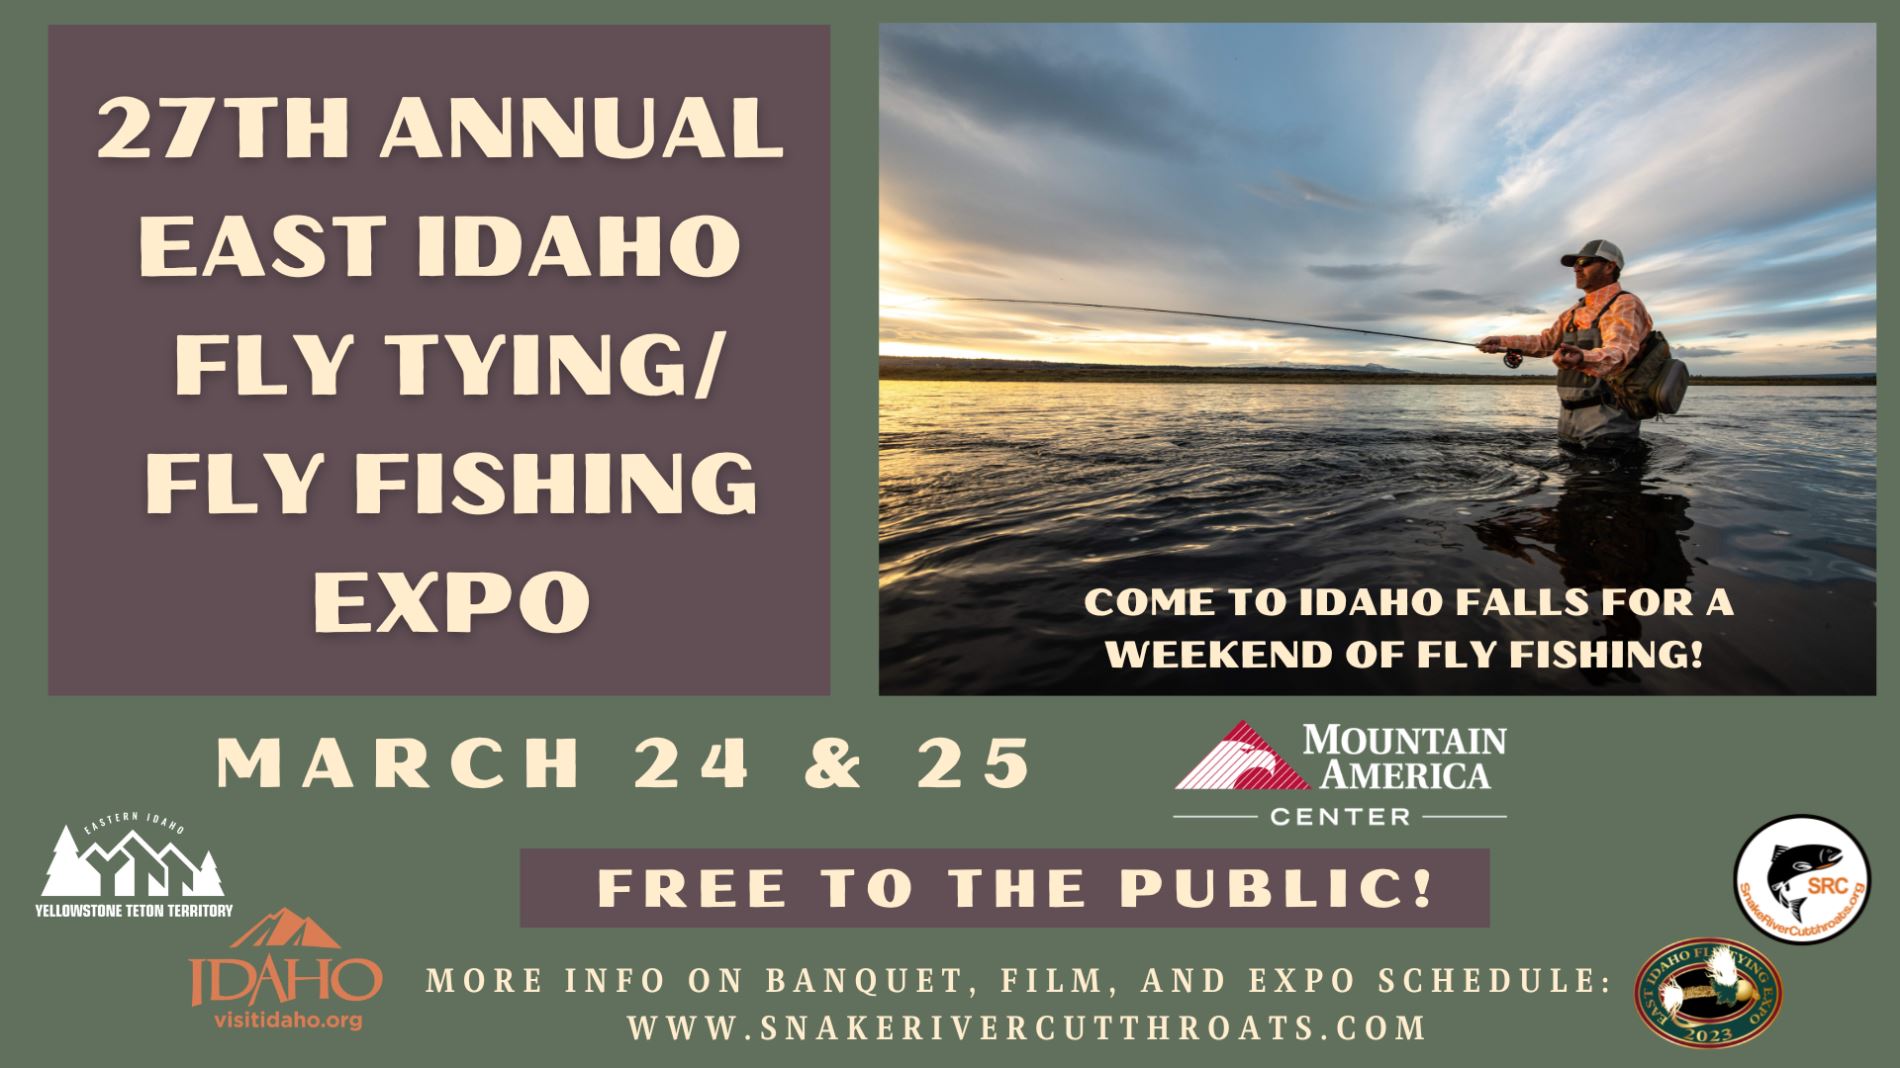 27th Annual East Idaho Fly Tying/Fly Fishing Expo at the Mountain